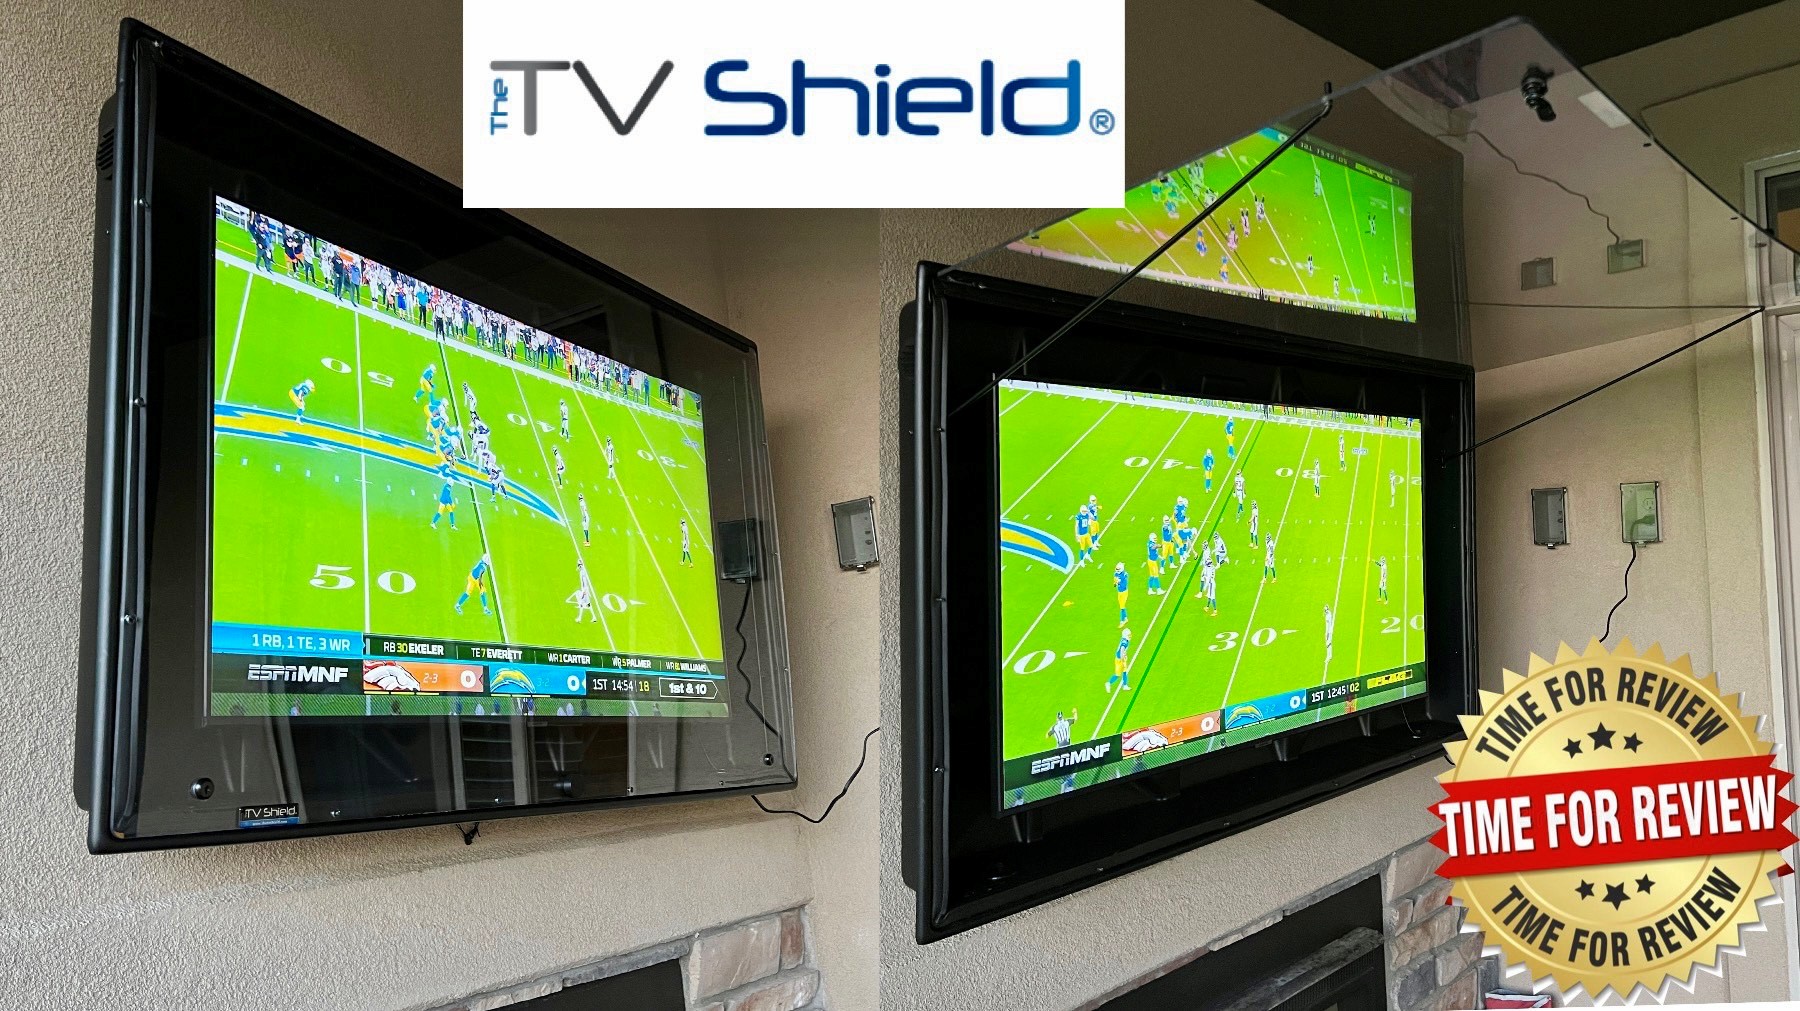 The TV Shield Review - Tailgating Challenge